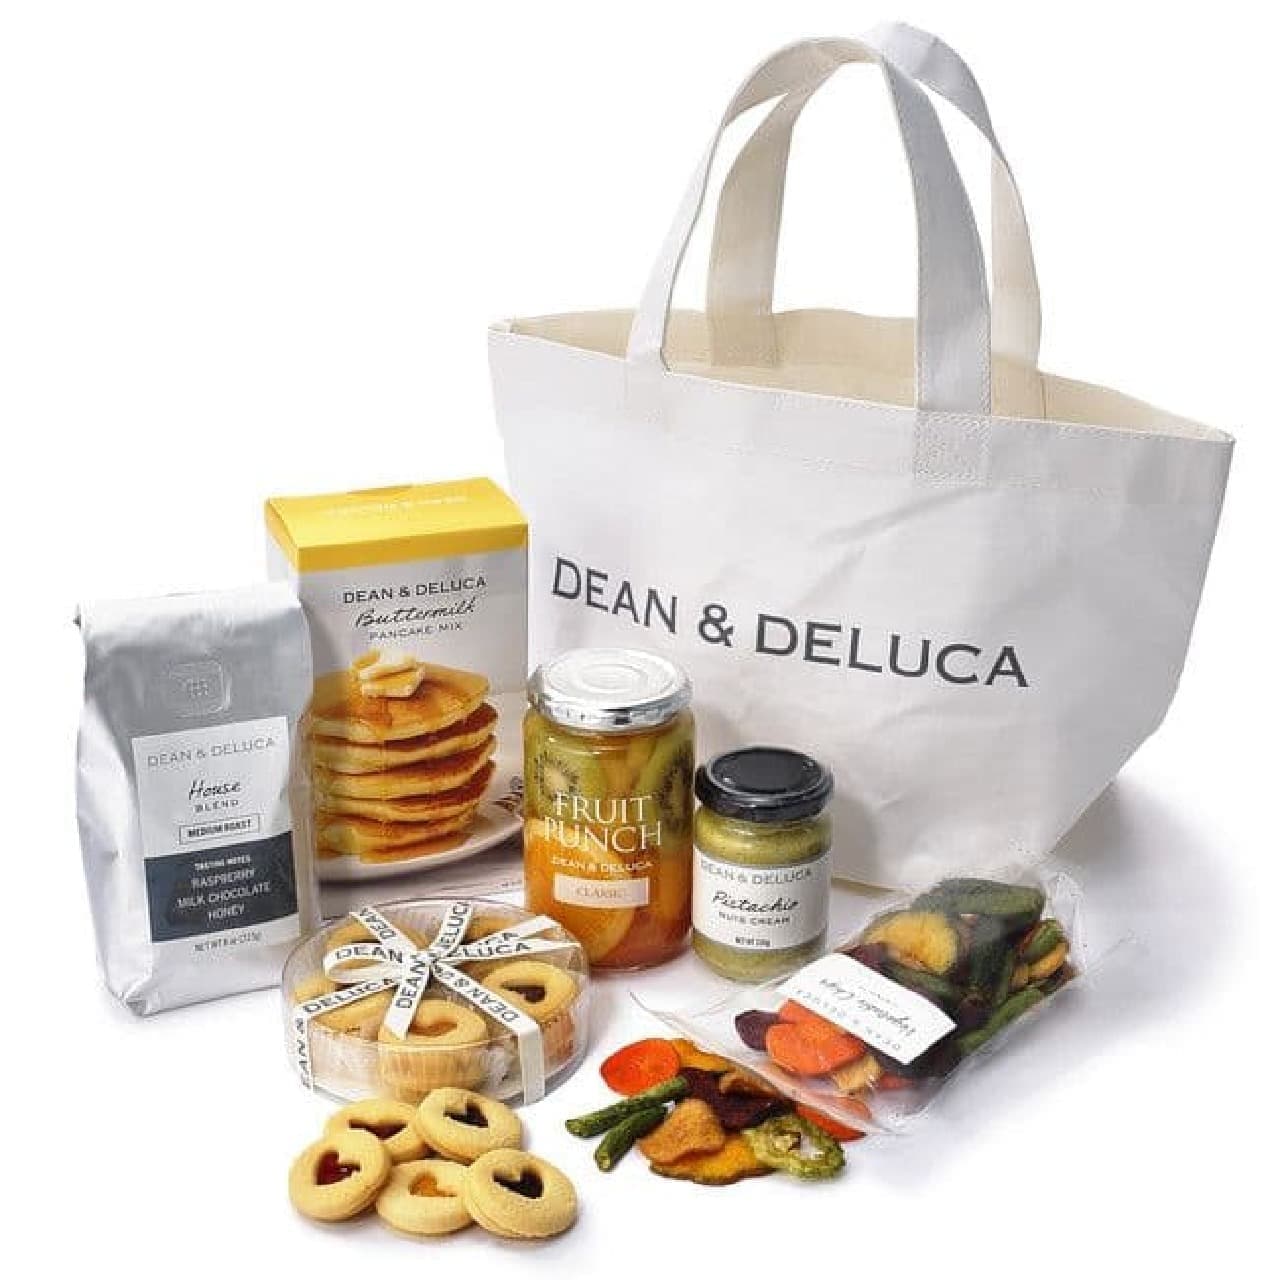 DEAN & DELUCA “Lucky Bag 2022” “Sweets Time Assortment”